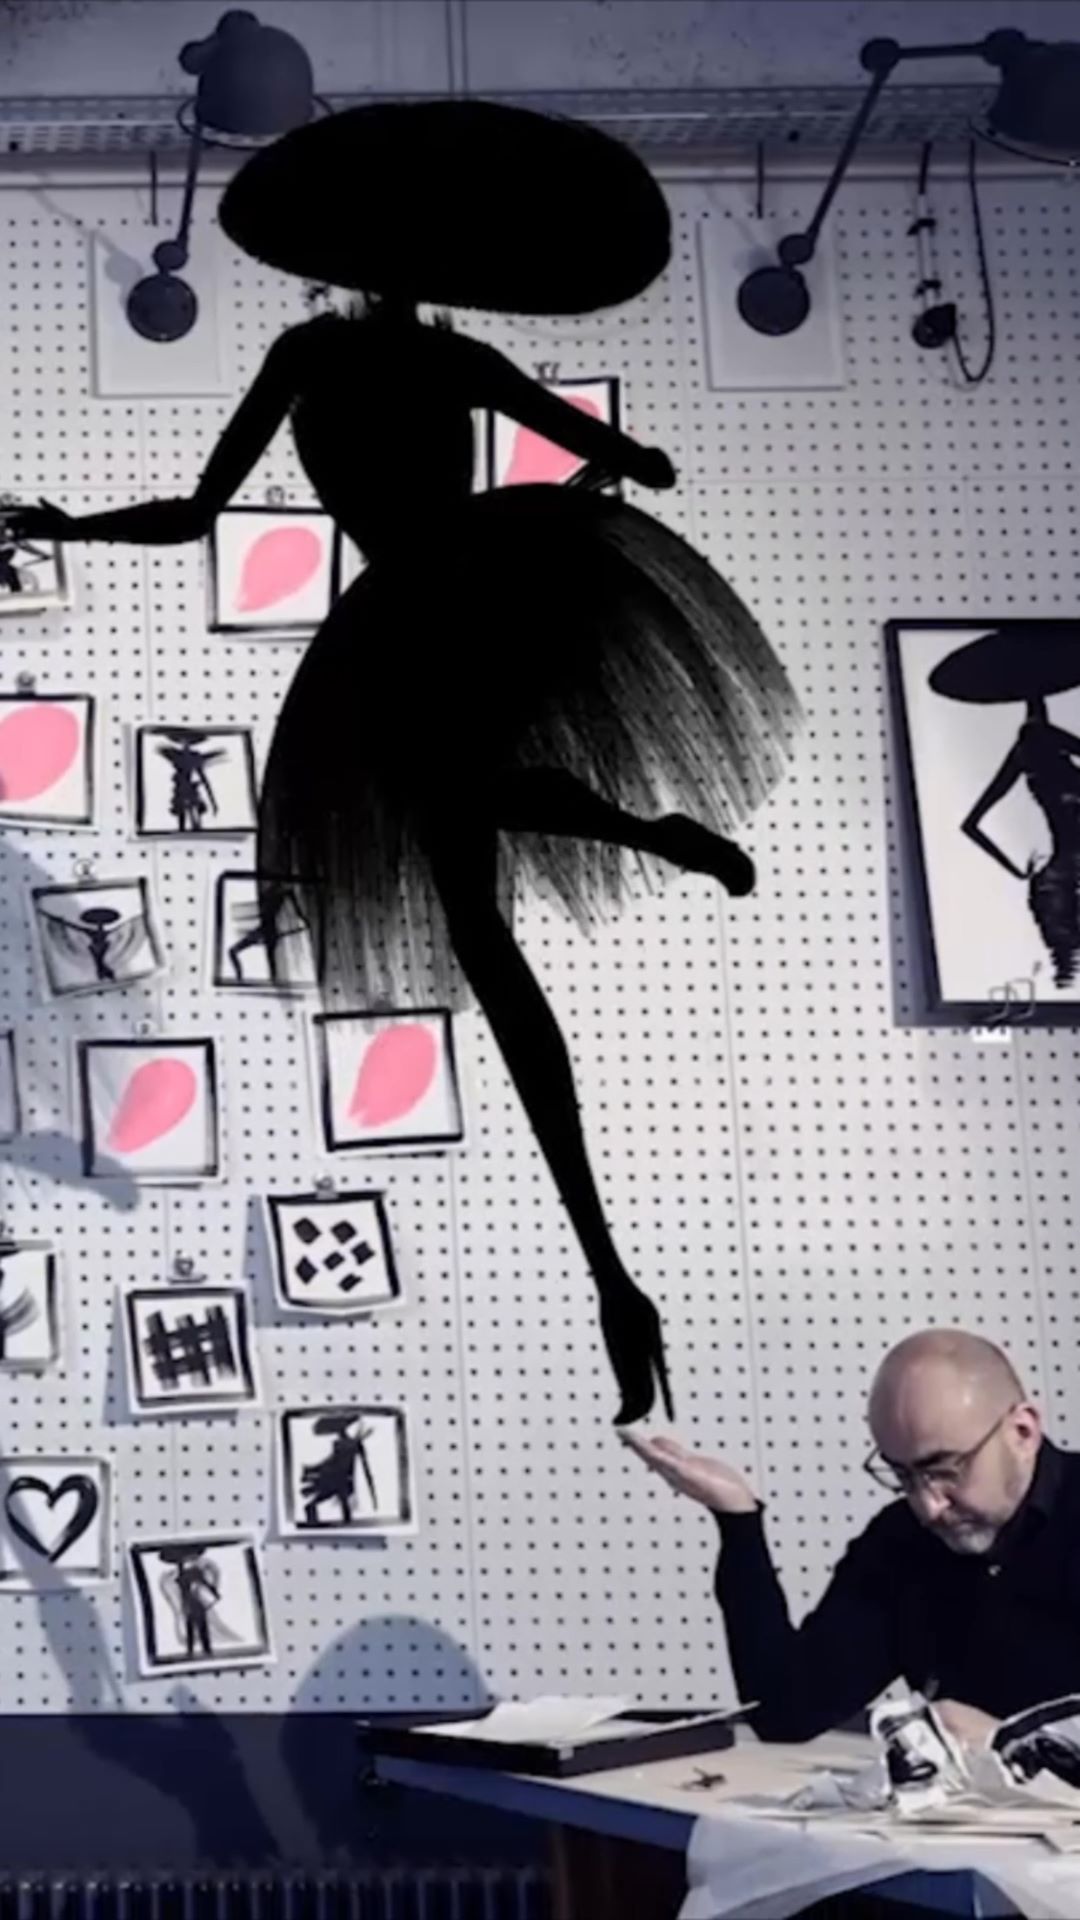 Guerlain - Tasked with bringing La Petite Robe Noire to life, Parisian creative duo Kuntzel + Deygas hand-designed a unique series of illustrations, paying homage to the legend of the Parisienne.

@ku...